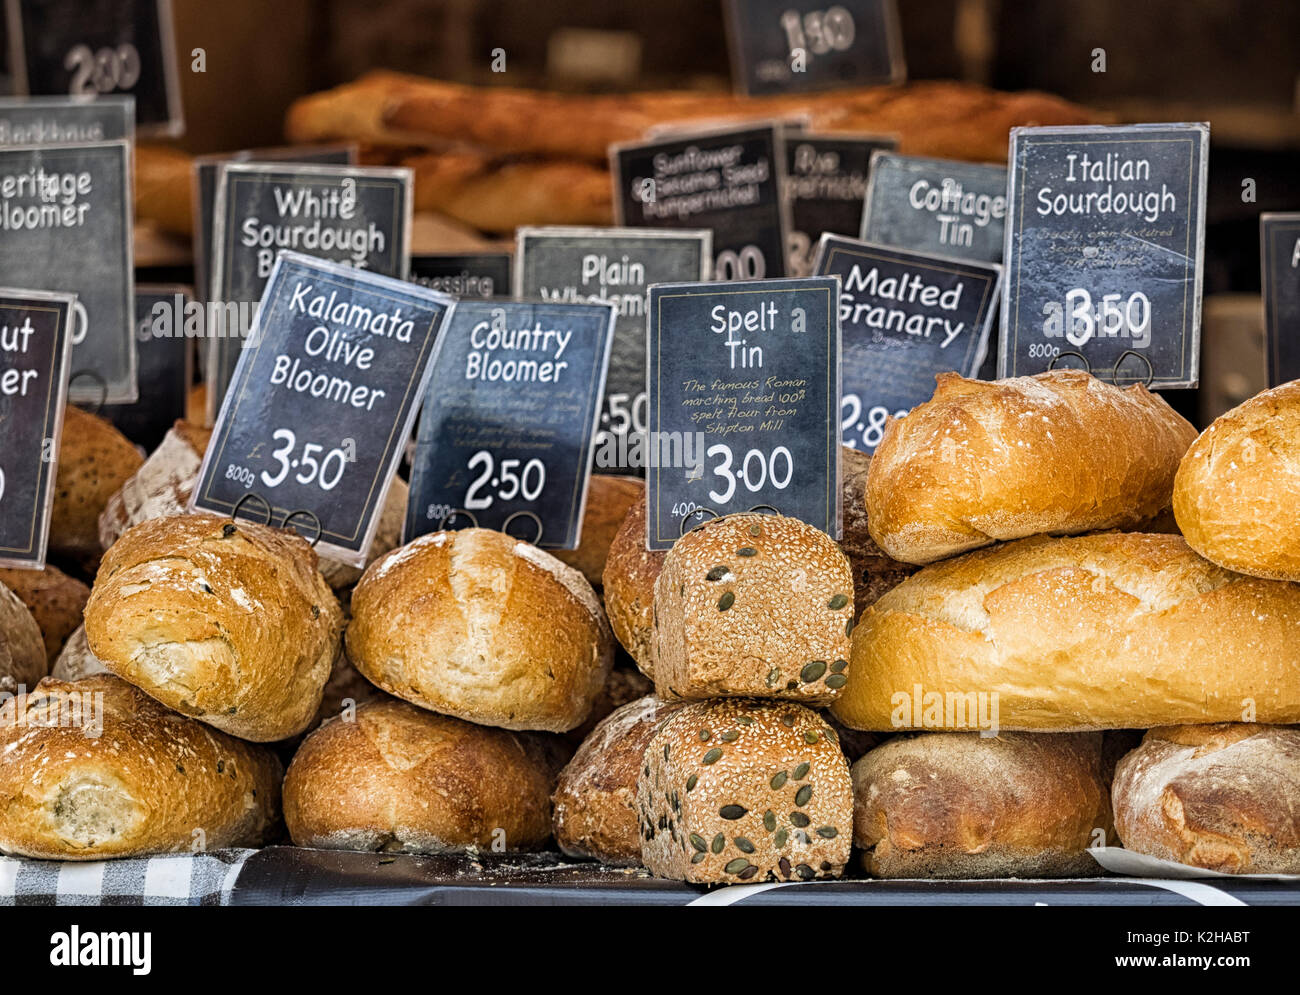 CAMBRIDGE, UK - AUGUST 11, 2017:   Artisan specialist bread for sale with price label at the market Stock Photo